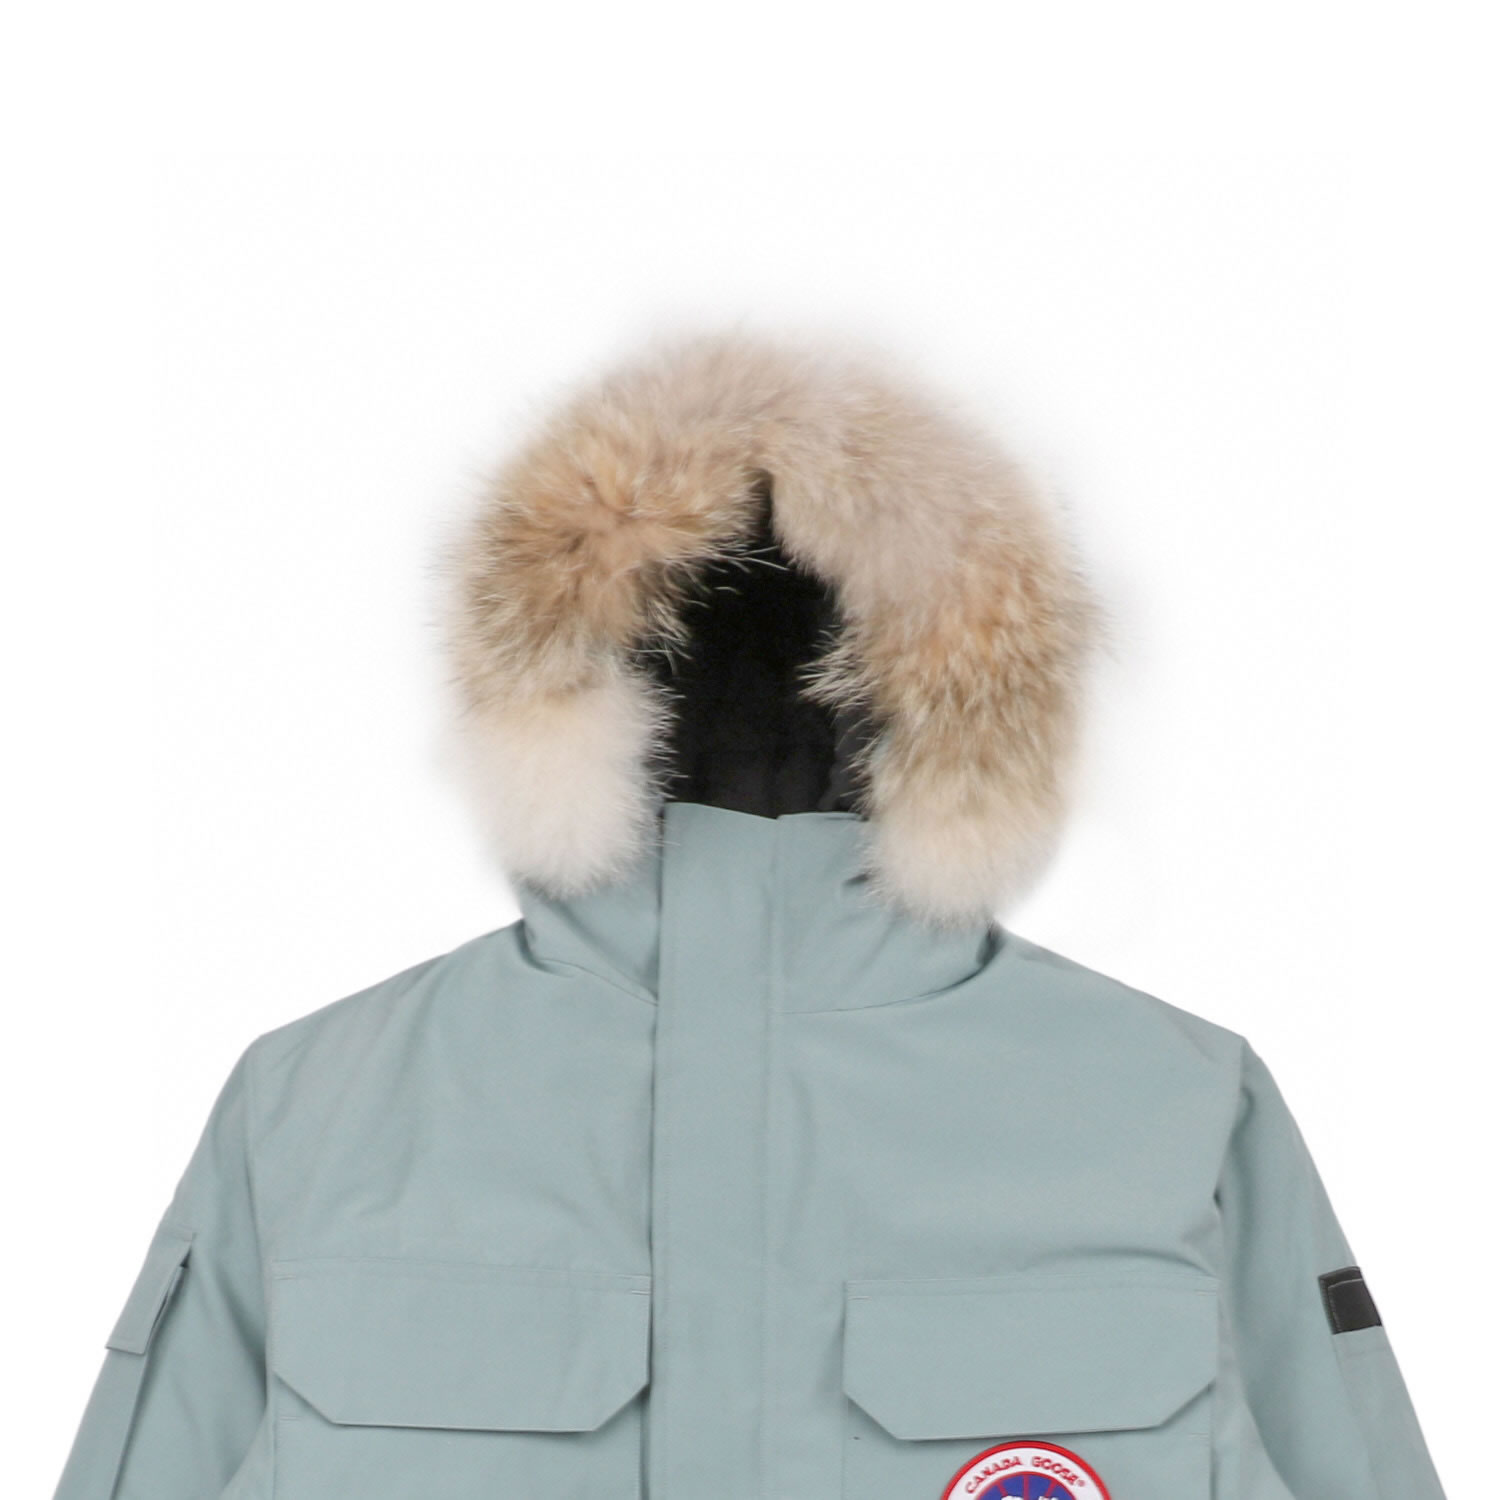 08 Canada Goose 19fw Expedition 4660ma Down Jacket Coat Cyan (3) - newkick.org